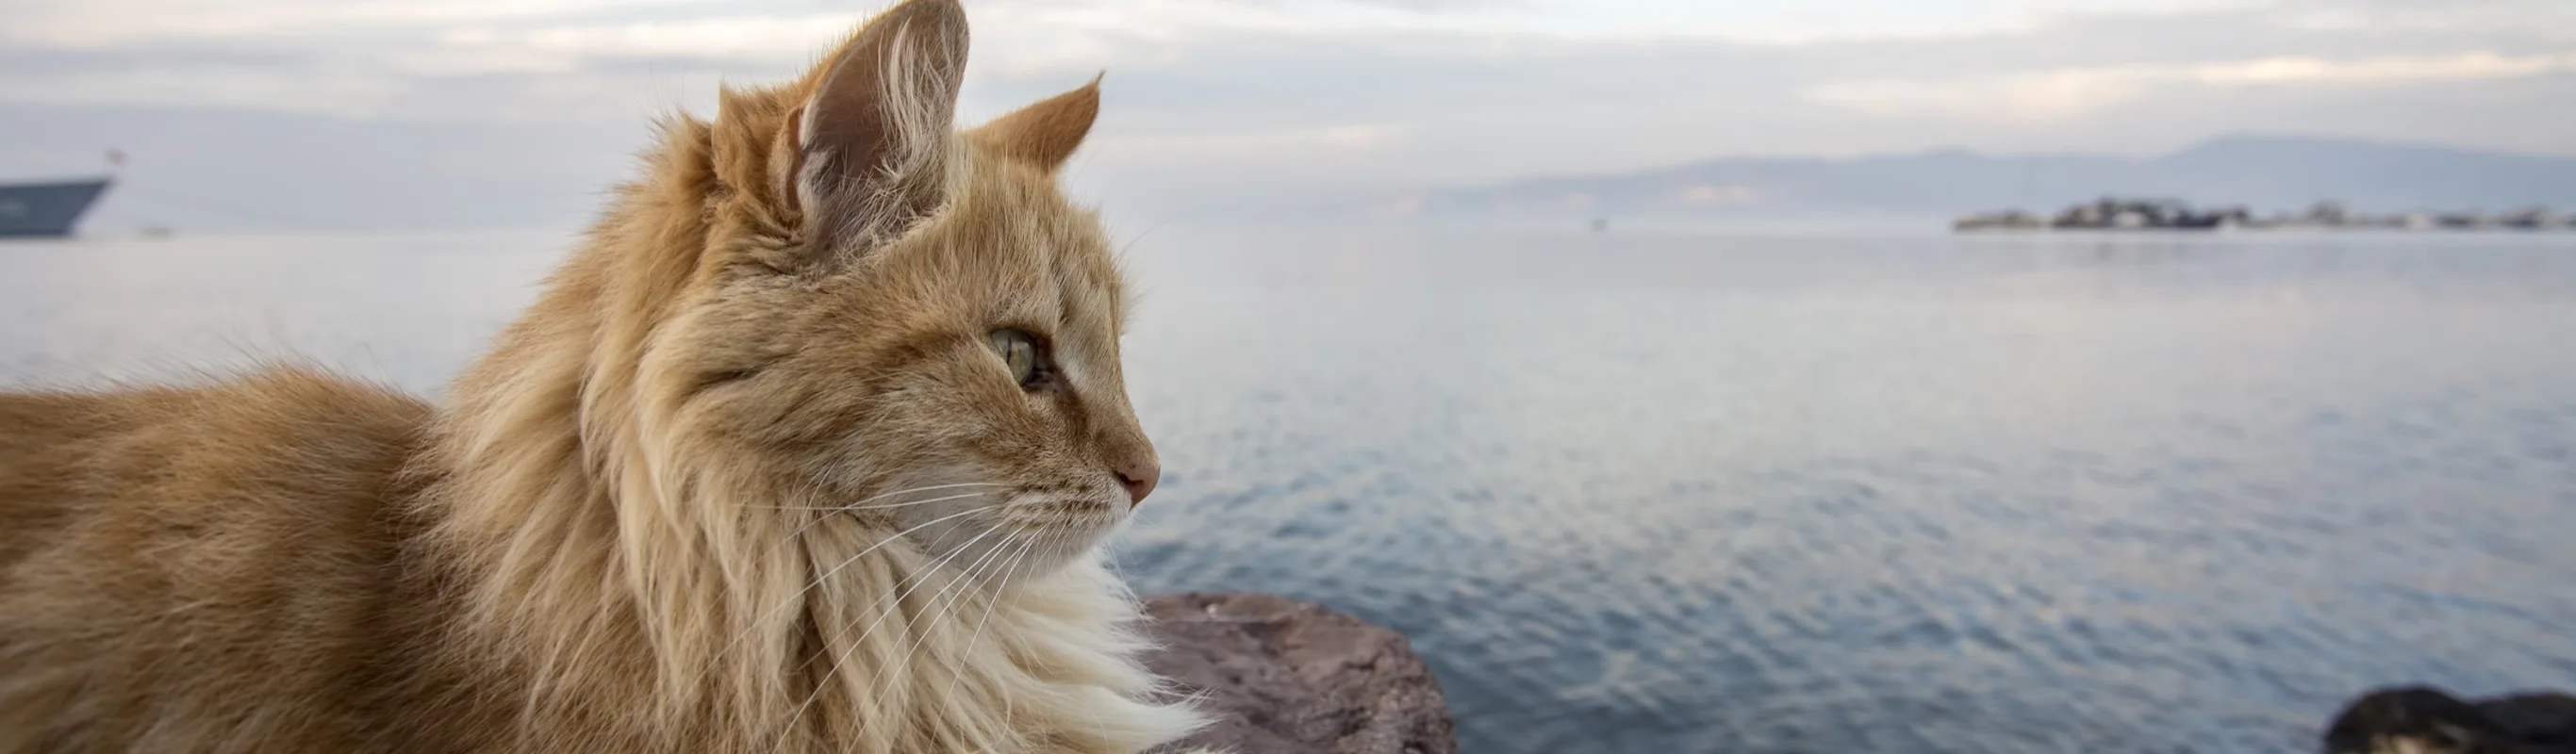 Cat sitting at the edge of a cliff overlooking water